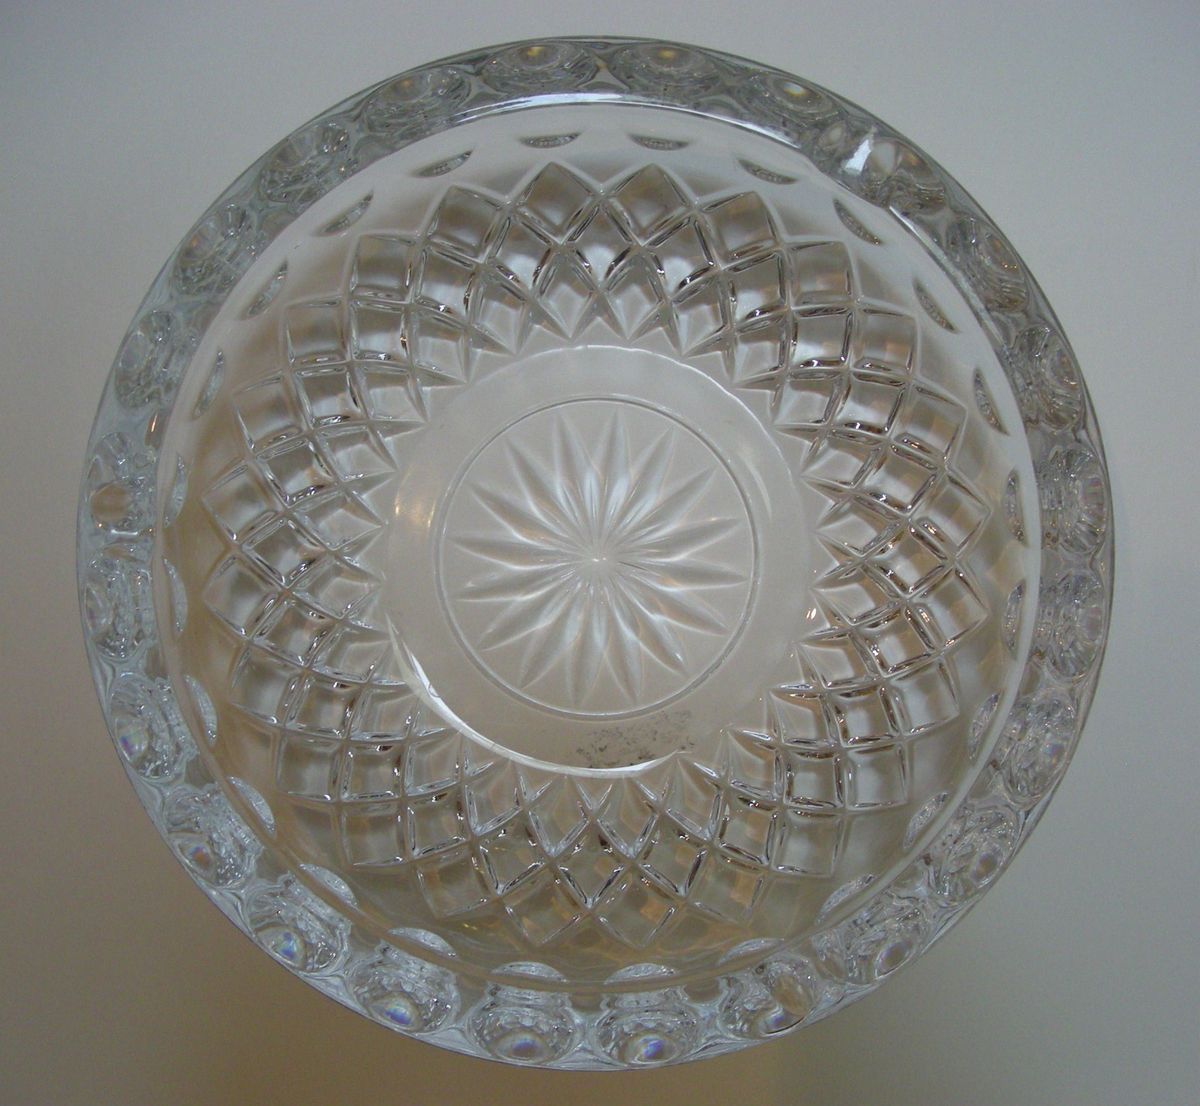  House Highlights Lead Crystal Ashtray Glass Excellent Condition